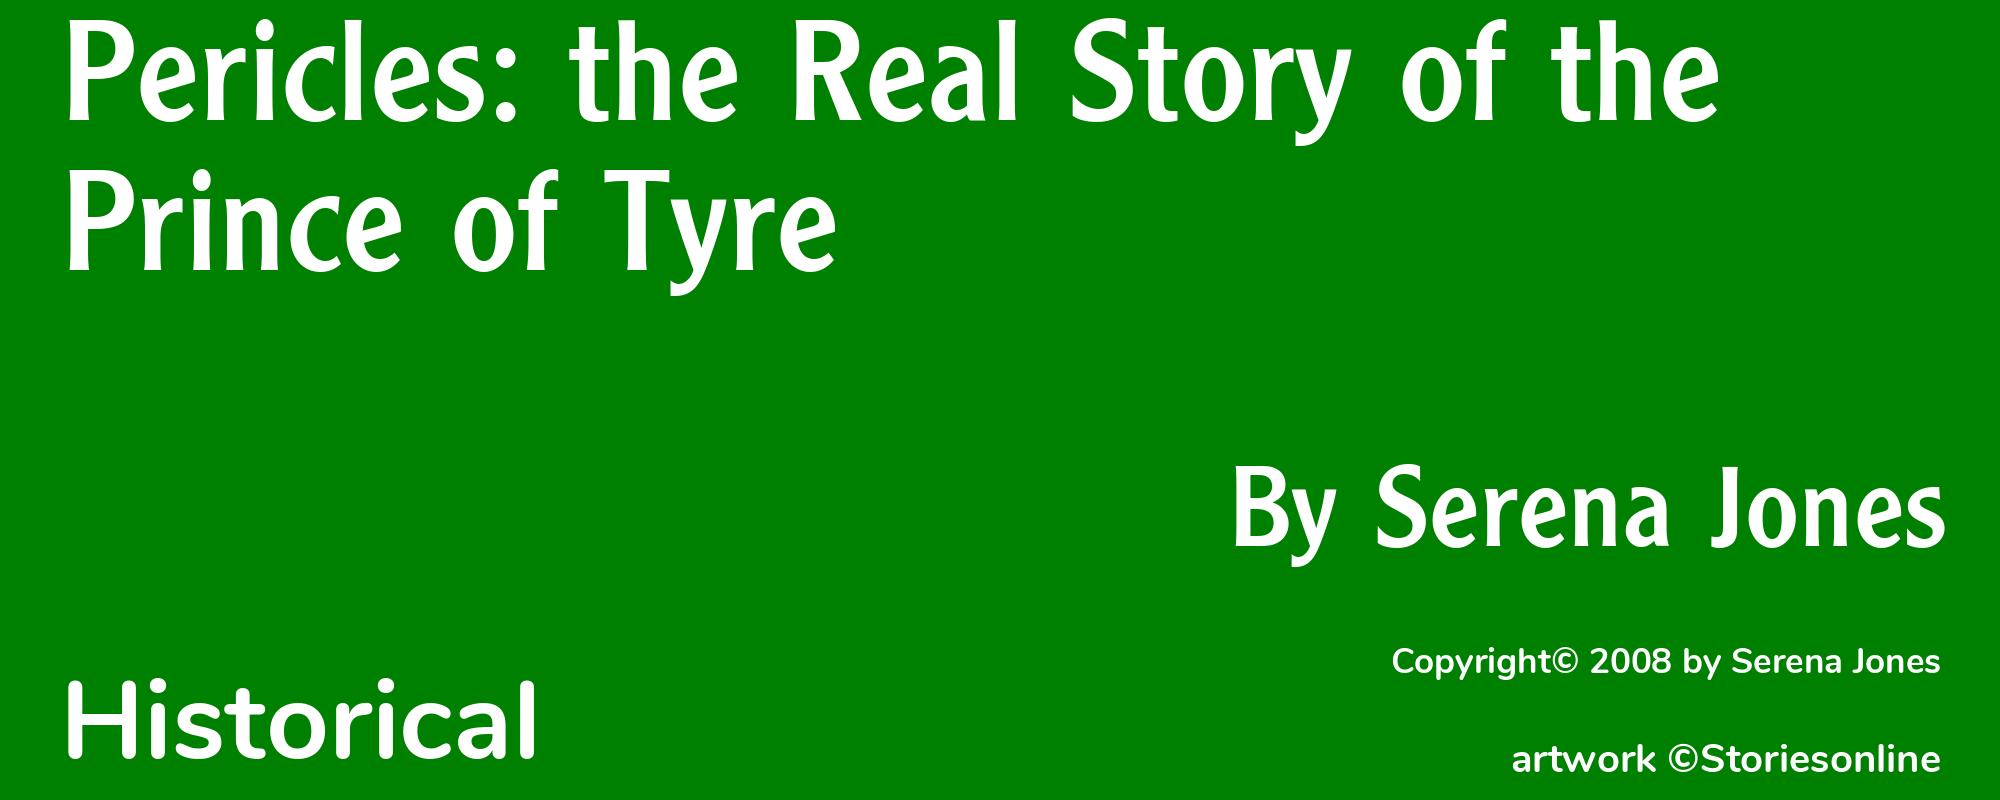 Pericles: the Real Story of the Prince of Tyre - Cover